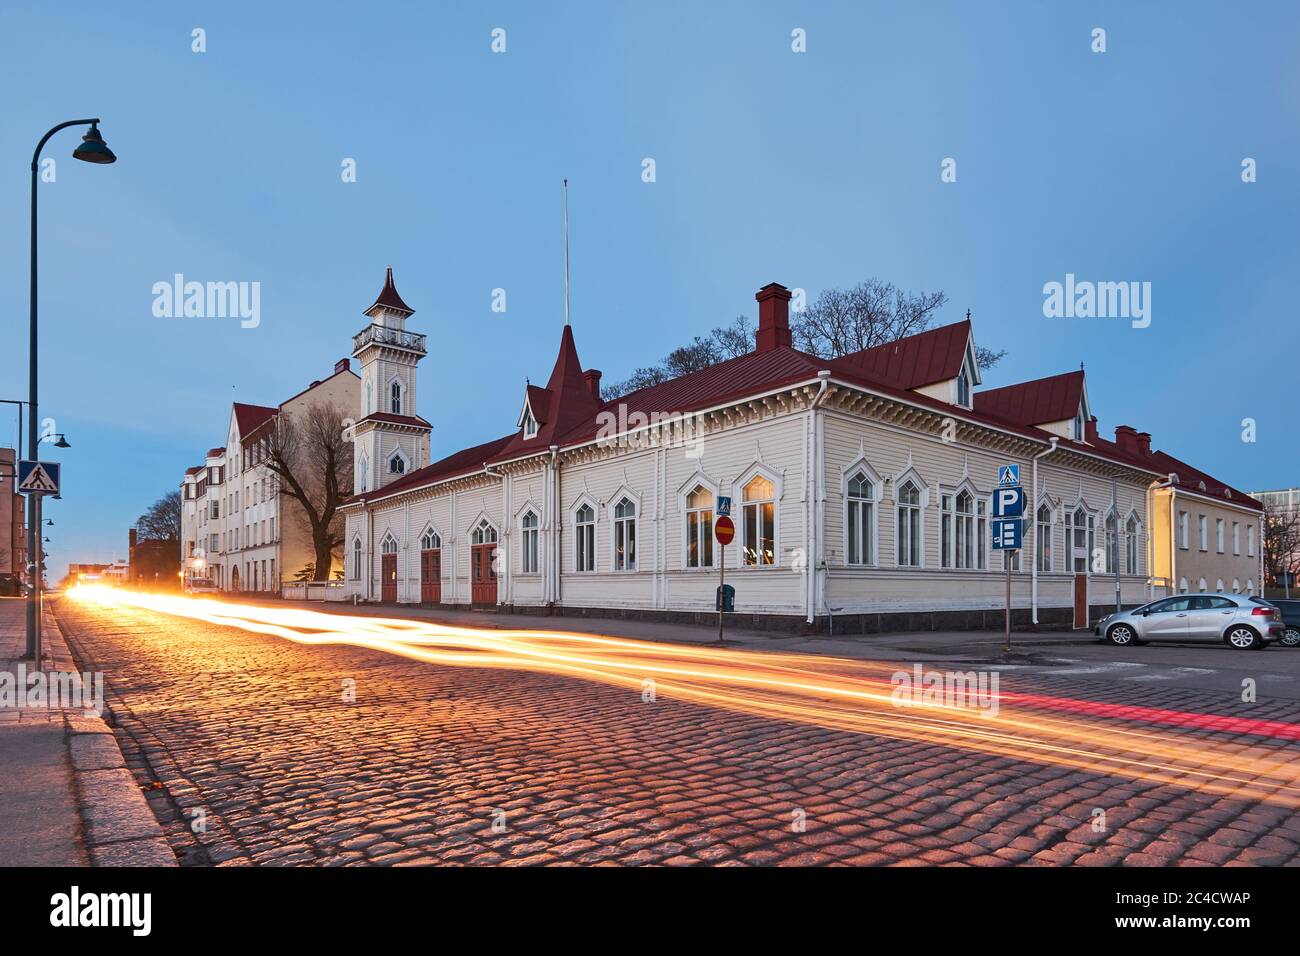 Evening cityscape in the city of Kotka in Finland. A street in the old town paved with stone, a wooden old building of fire department. Stock Photo